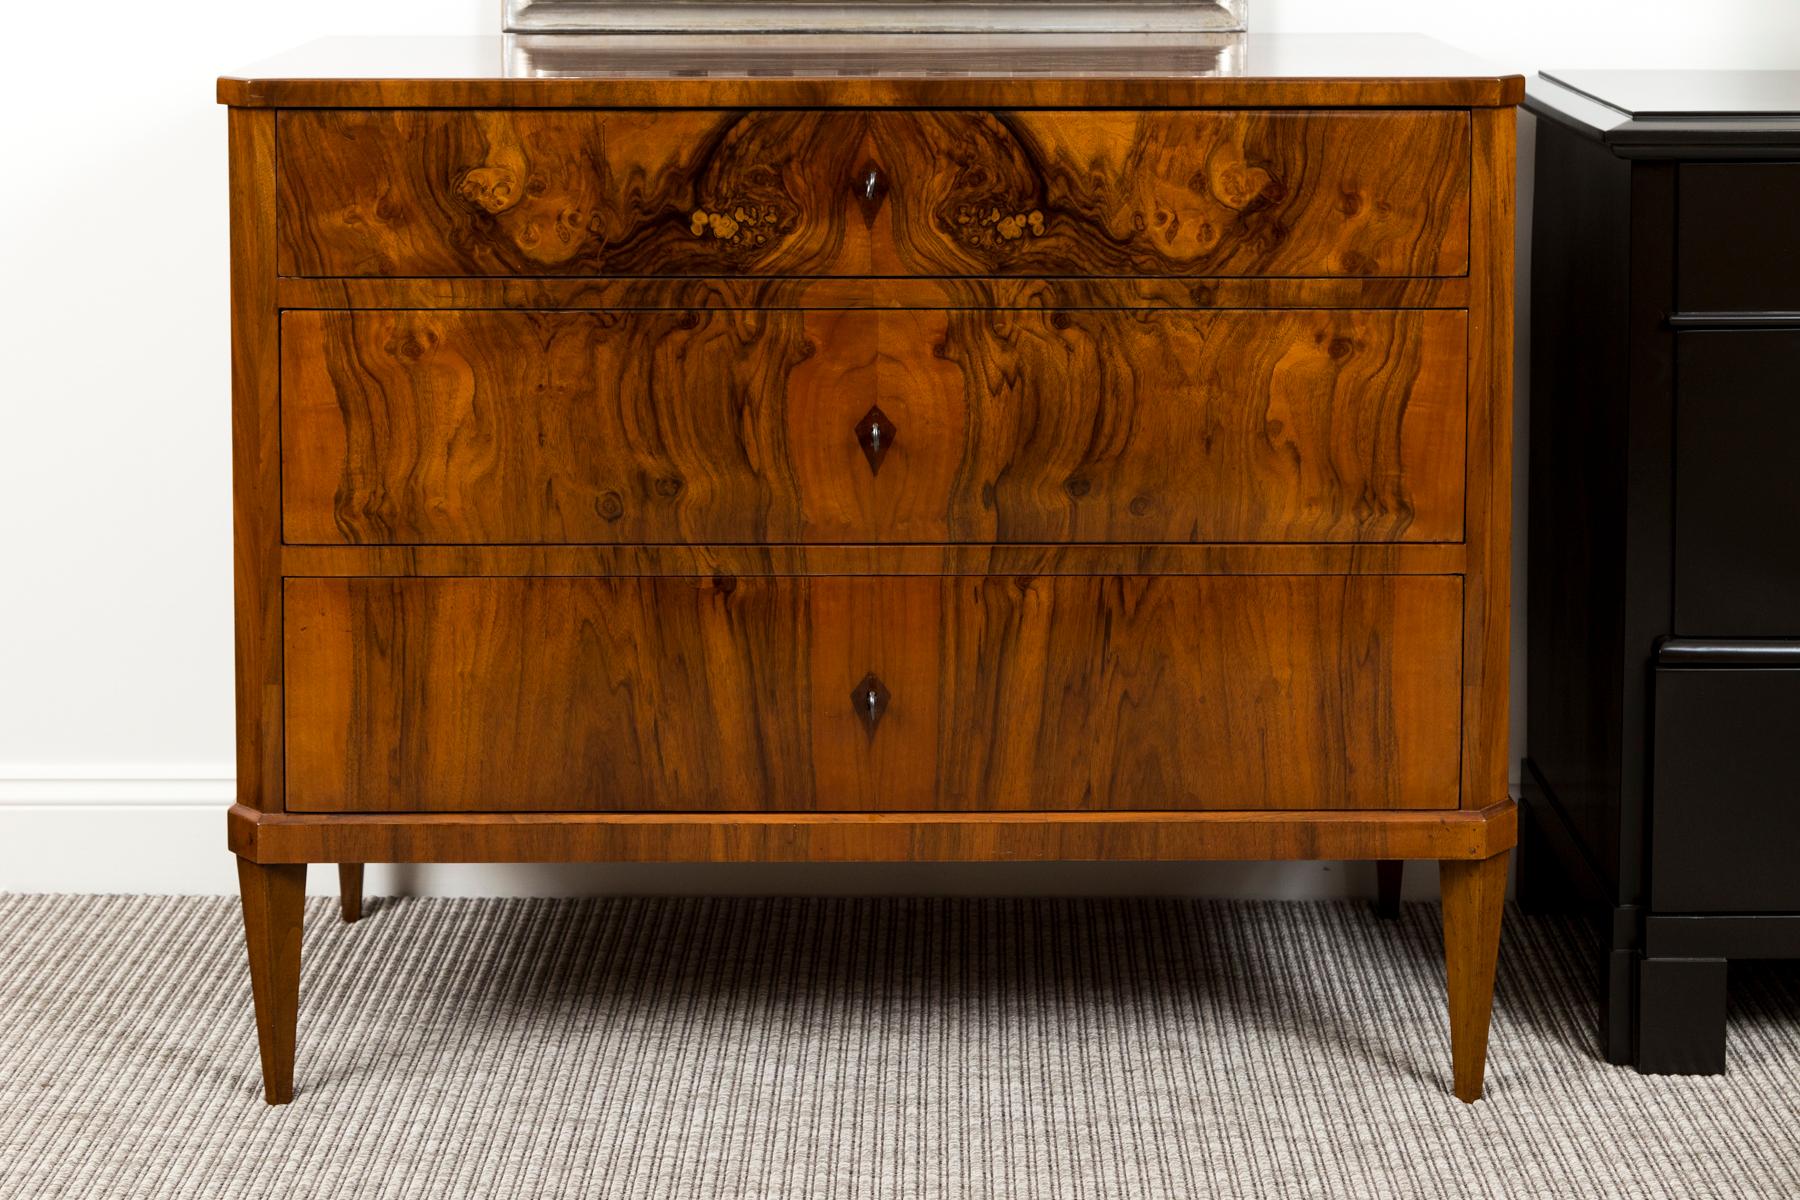 Two stunning and complimenting Biedermeier style walnut book matched veneer chests comprised of  three working drawers opening each with a key used as a pull and finishing on chamfered straight and tapered legs. Both restored at the same time